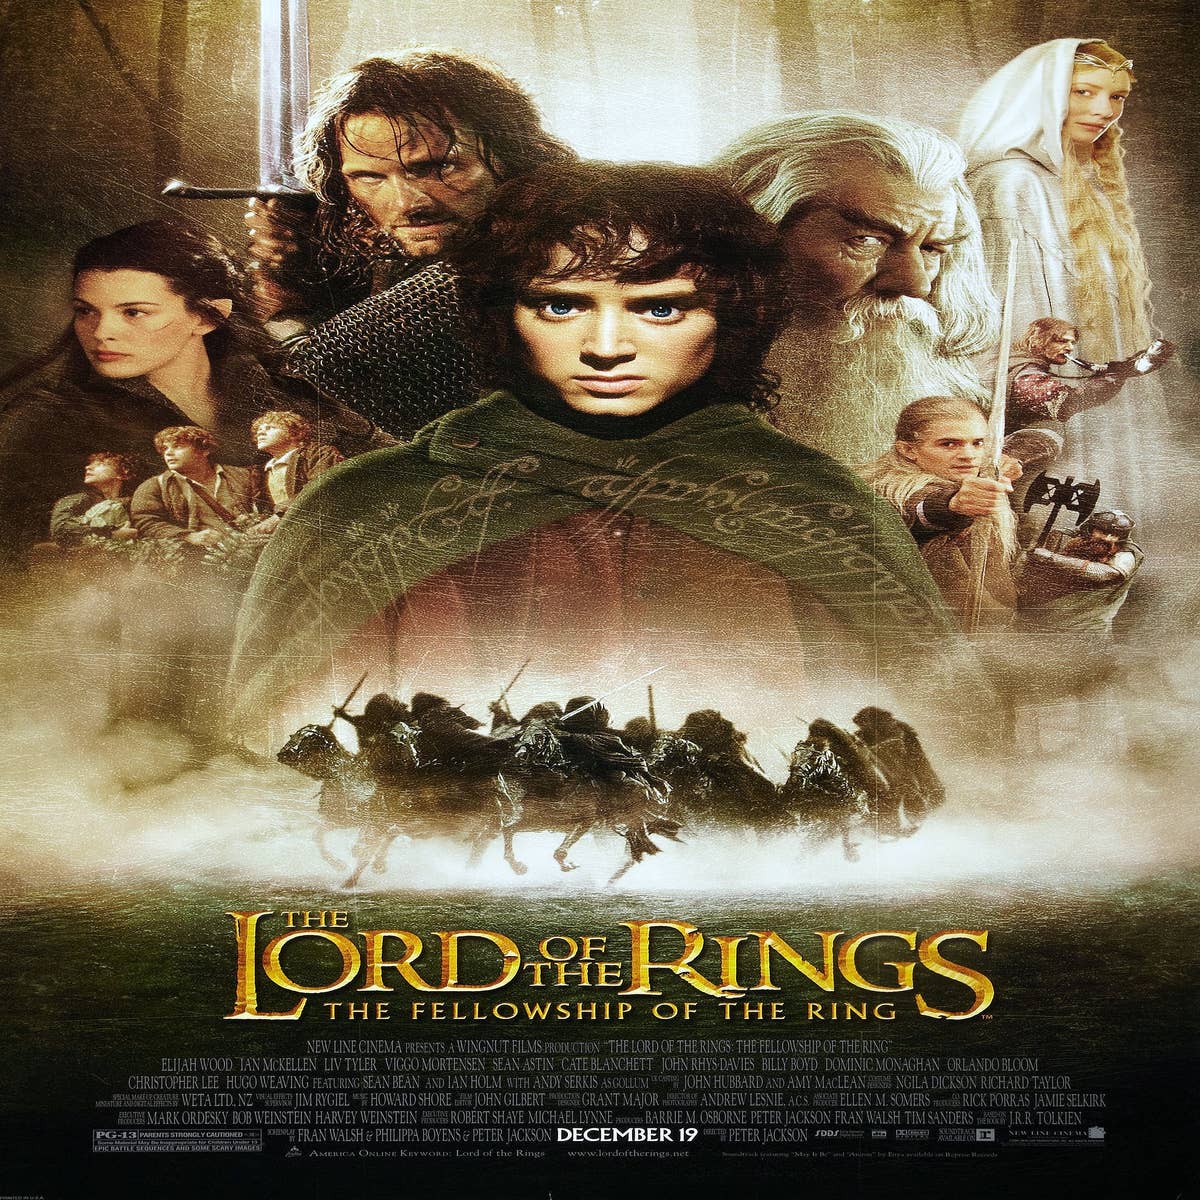 The Lord of the Rings: The War of the Rohirrim: What We Know So Far